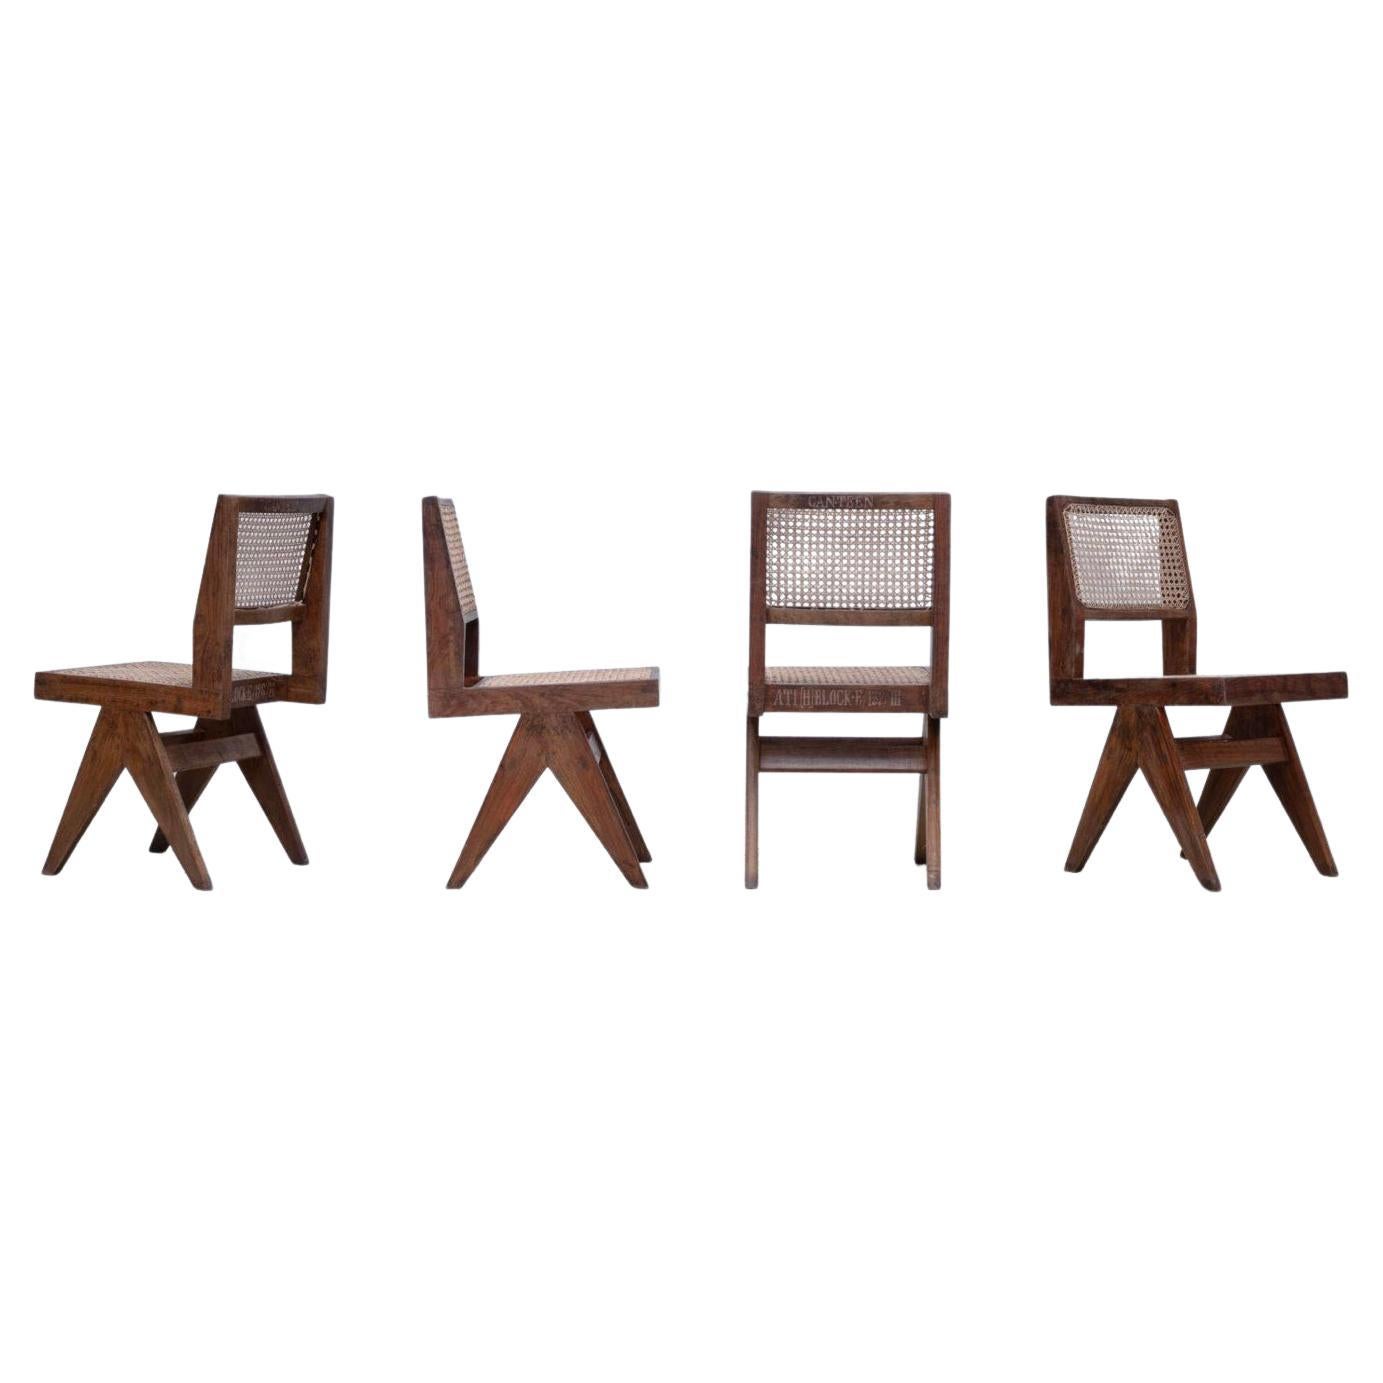 Pierre Jeanneret , Dining Chair for Chandigarh, Teak , 1962s , set of 4